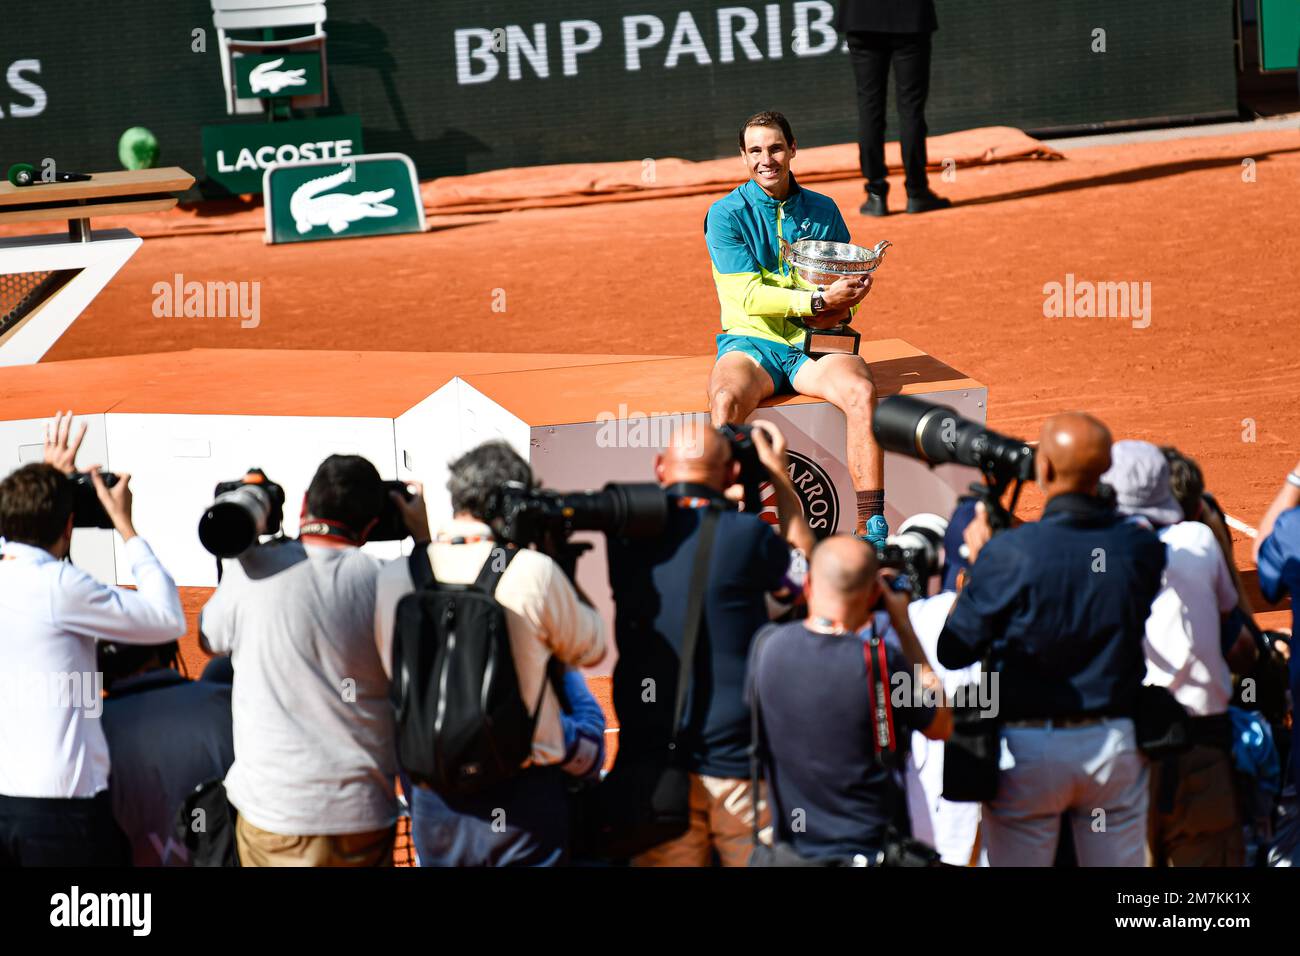 Spanish professional tennis player Rafael Nadal, winner of the Roland-Garros tennis tournament for the 14th time, on June 05, 2022. Rafael Nadal holdi Stock Photo